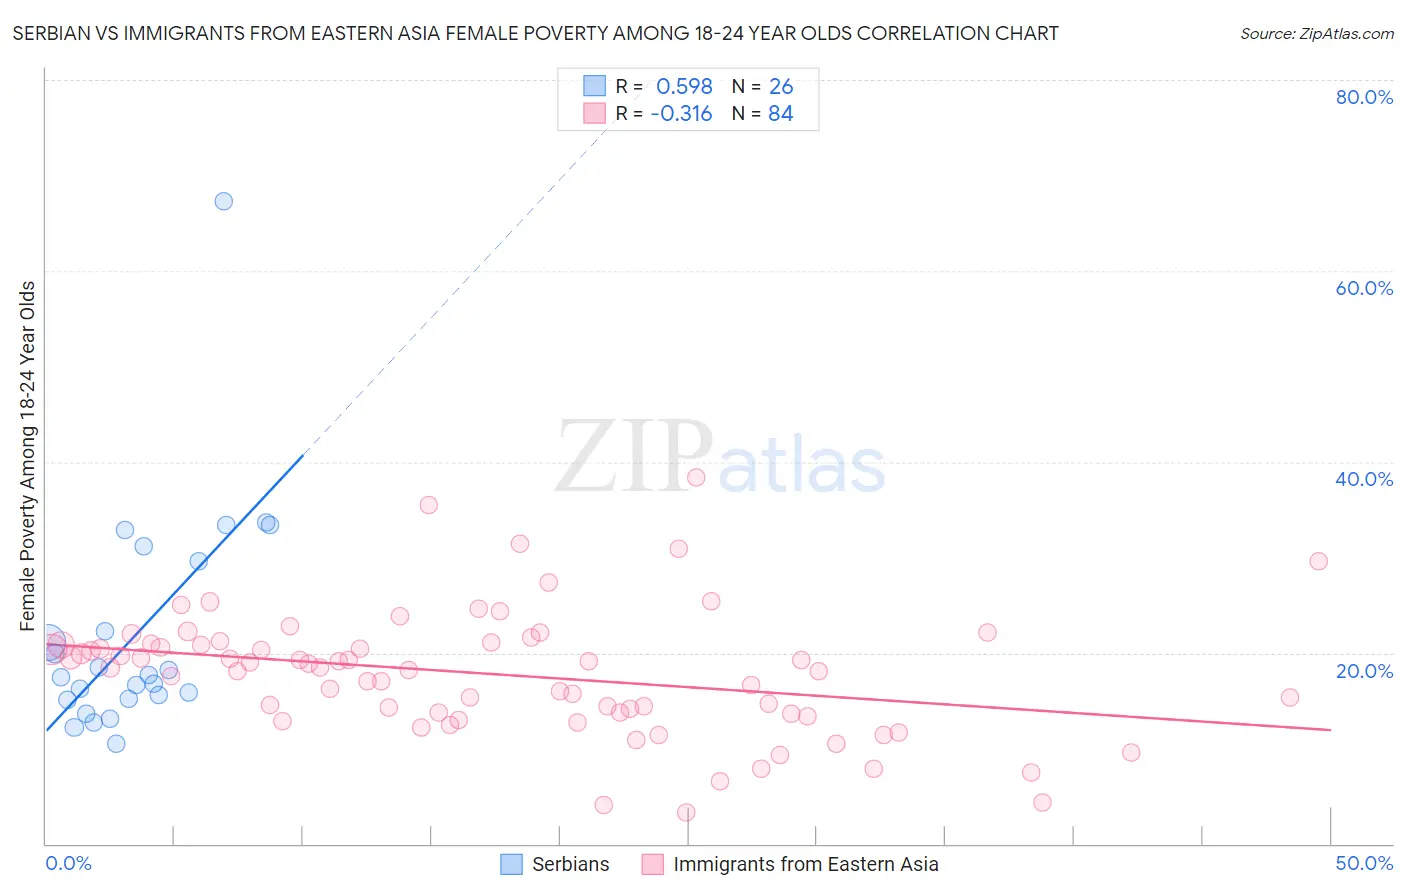 Serbian vs Immigrants from Eastern Asia Female Poverty Among 18-24 Year Olds